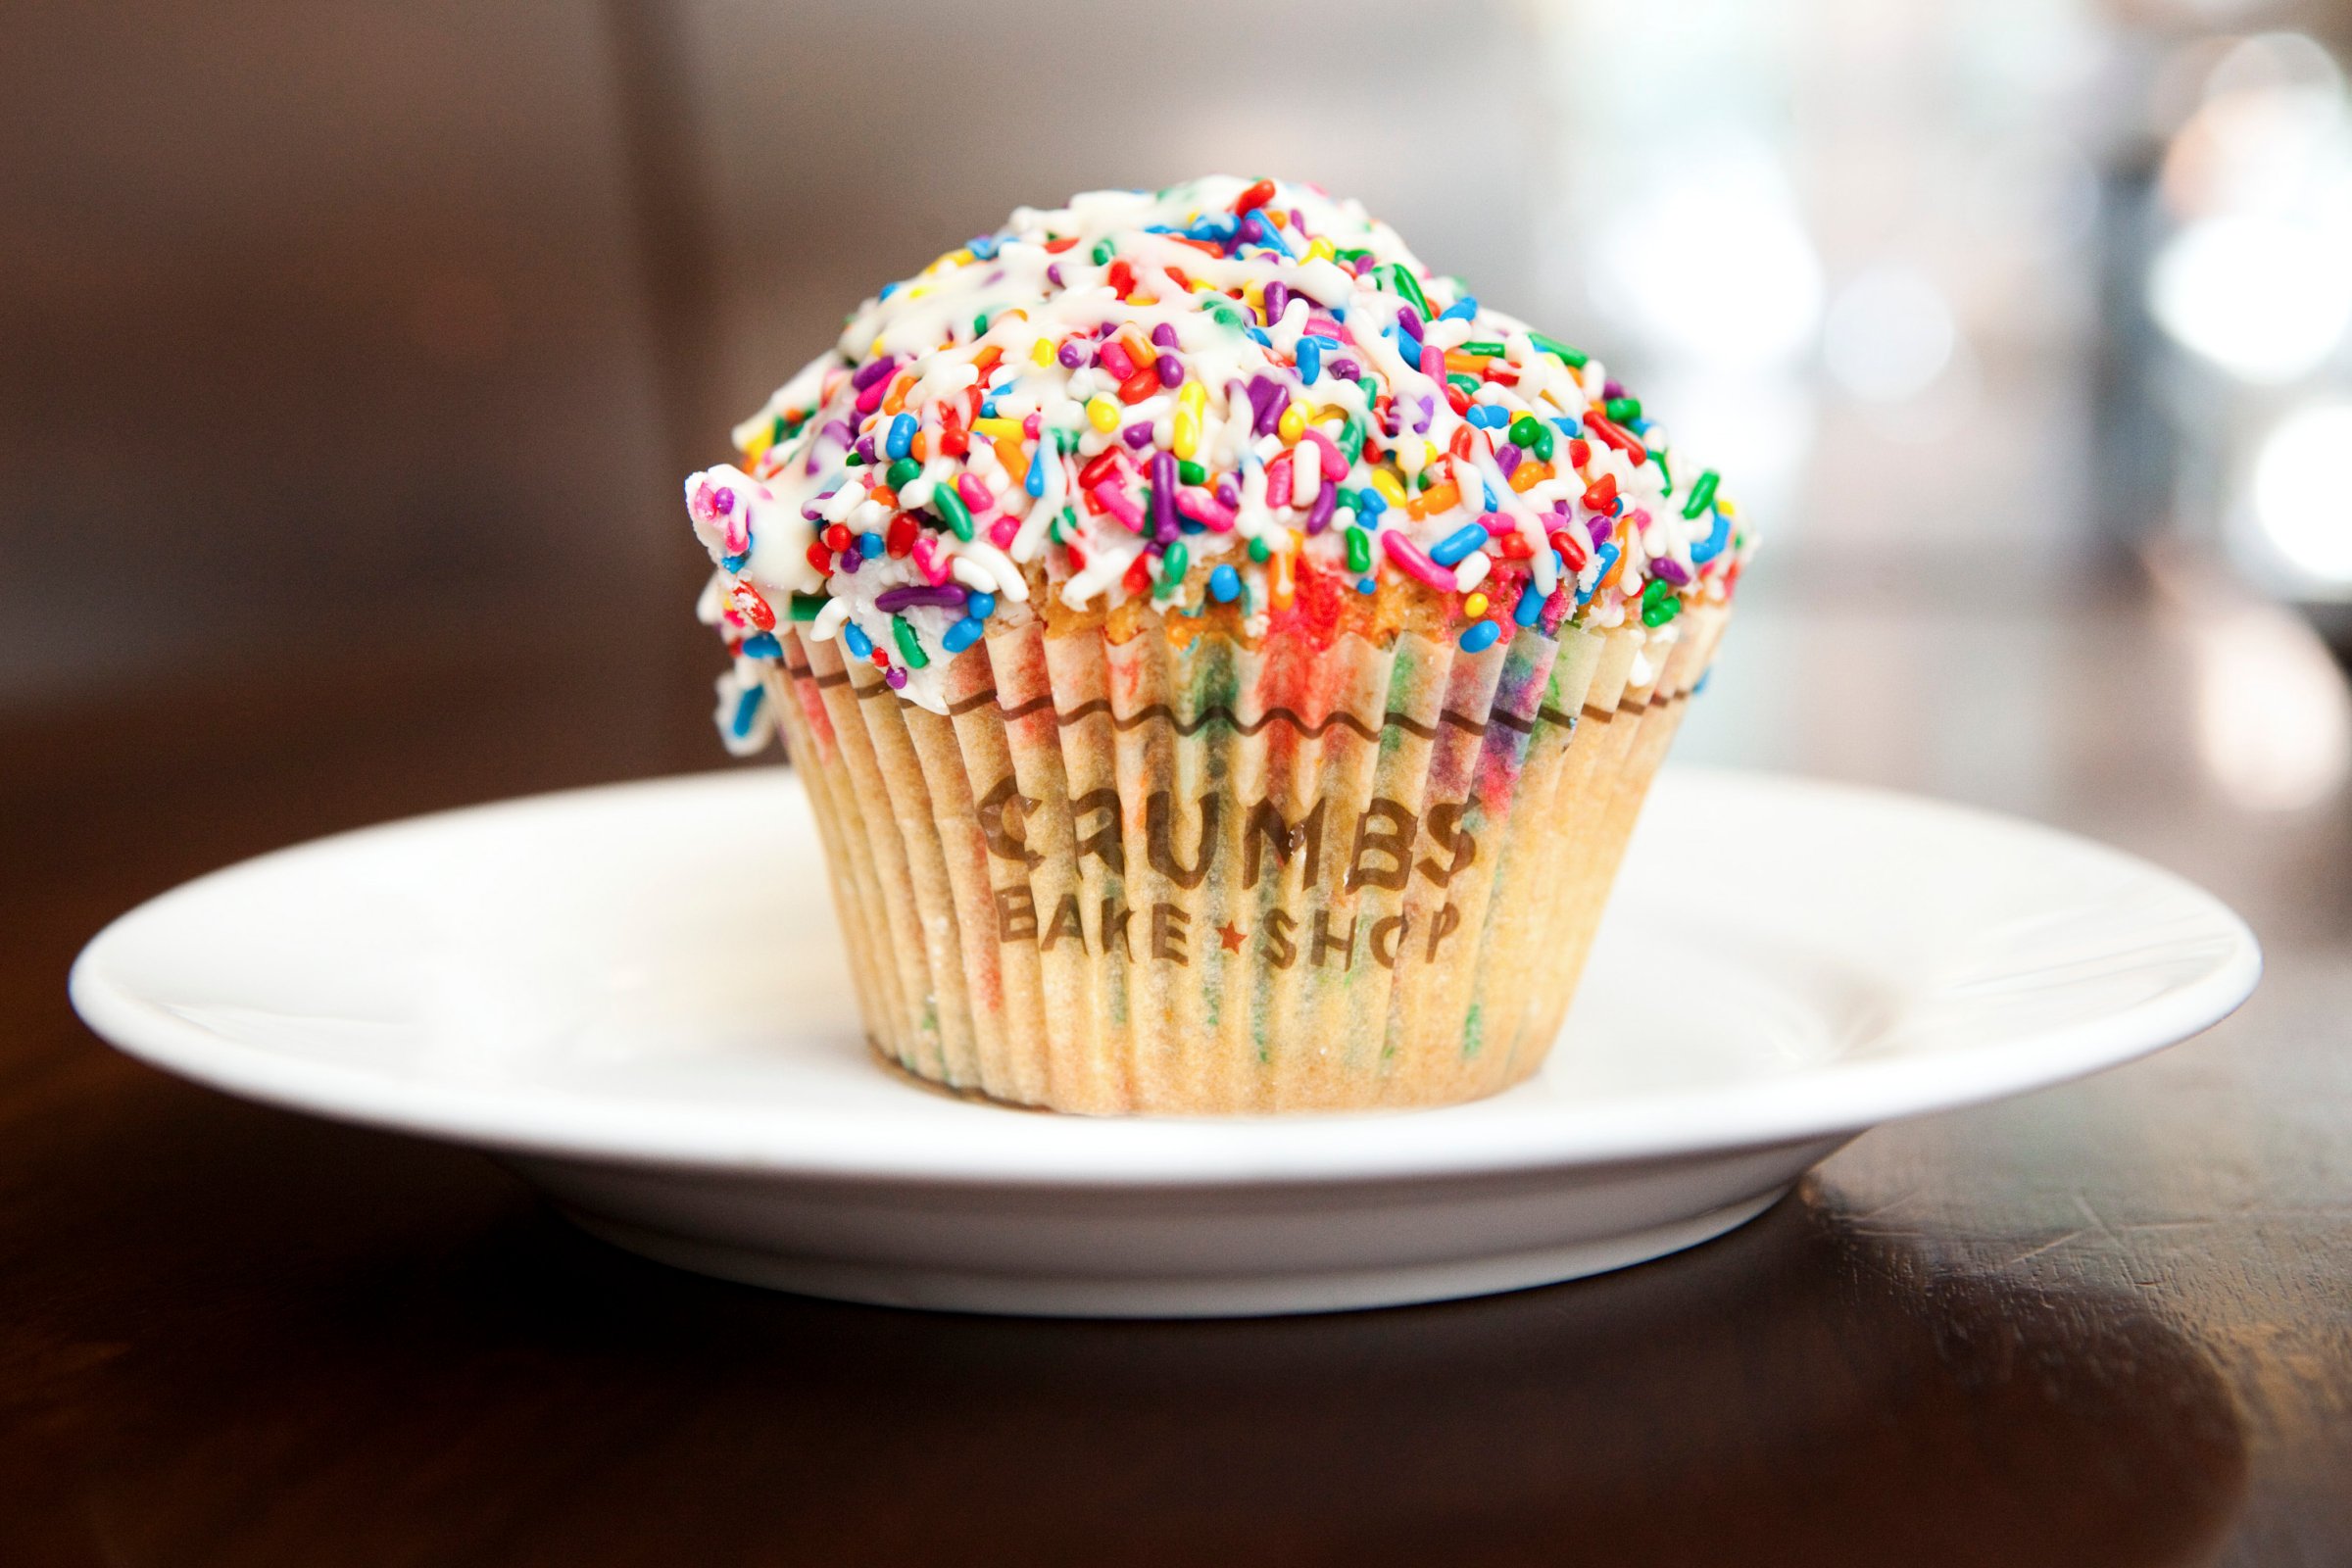 Store Operations At Crumbs, Largest U.S. Retailer Of Cupcakes